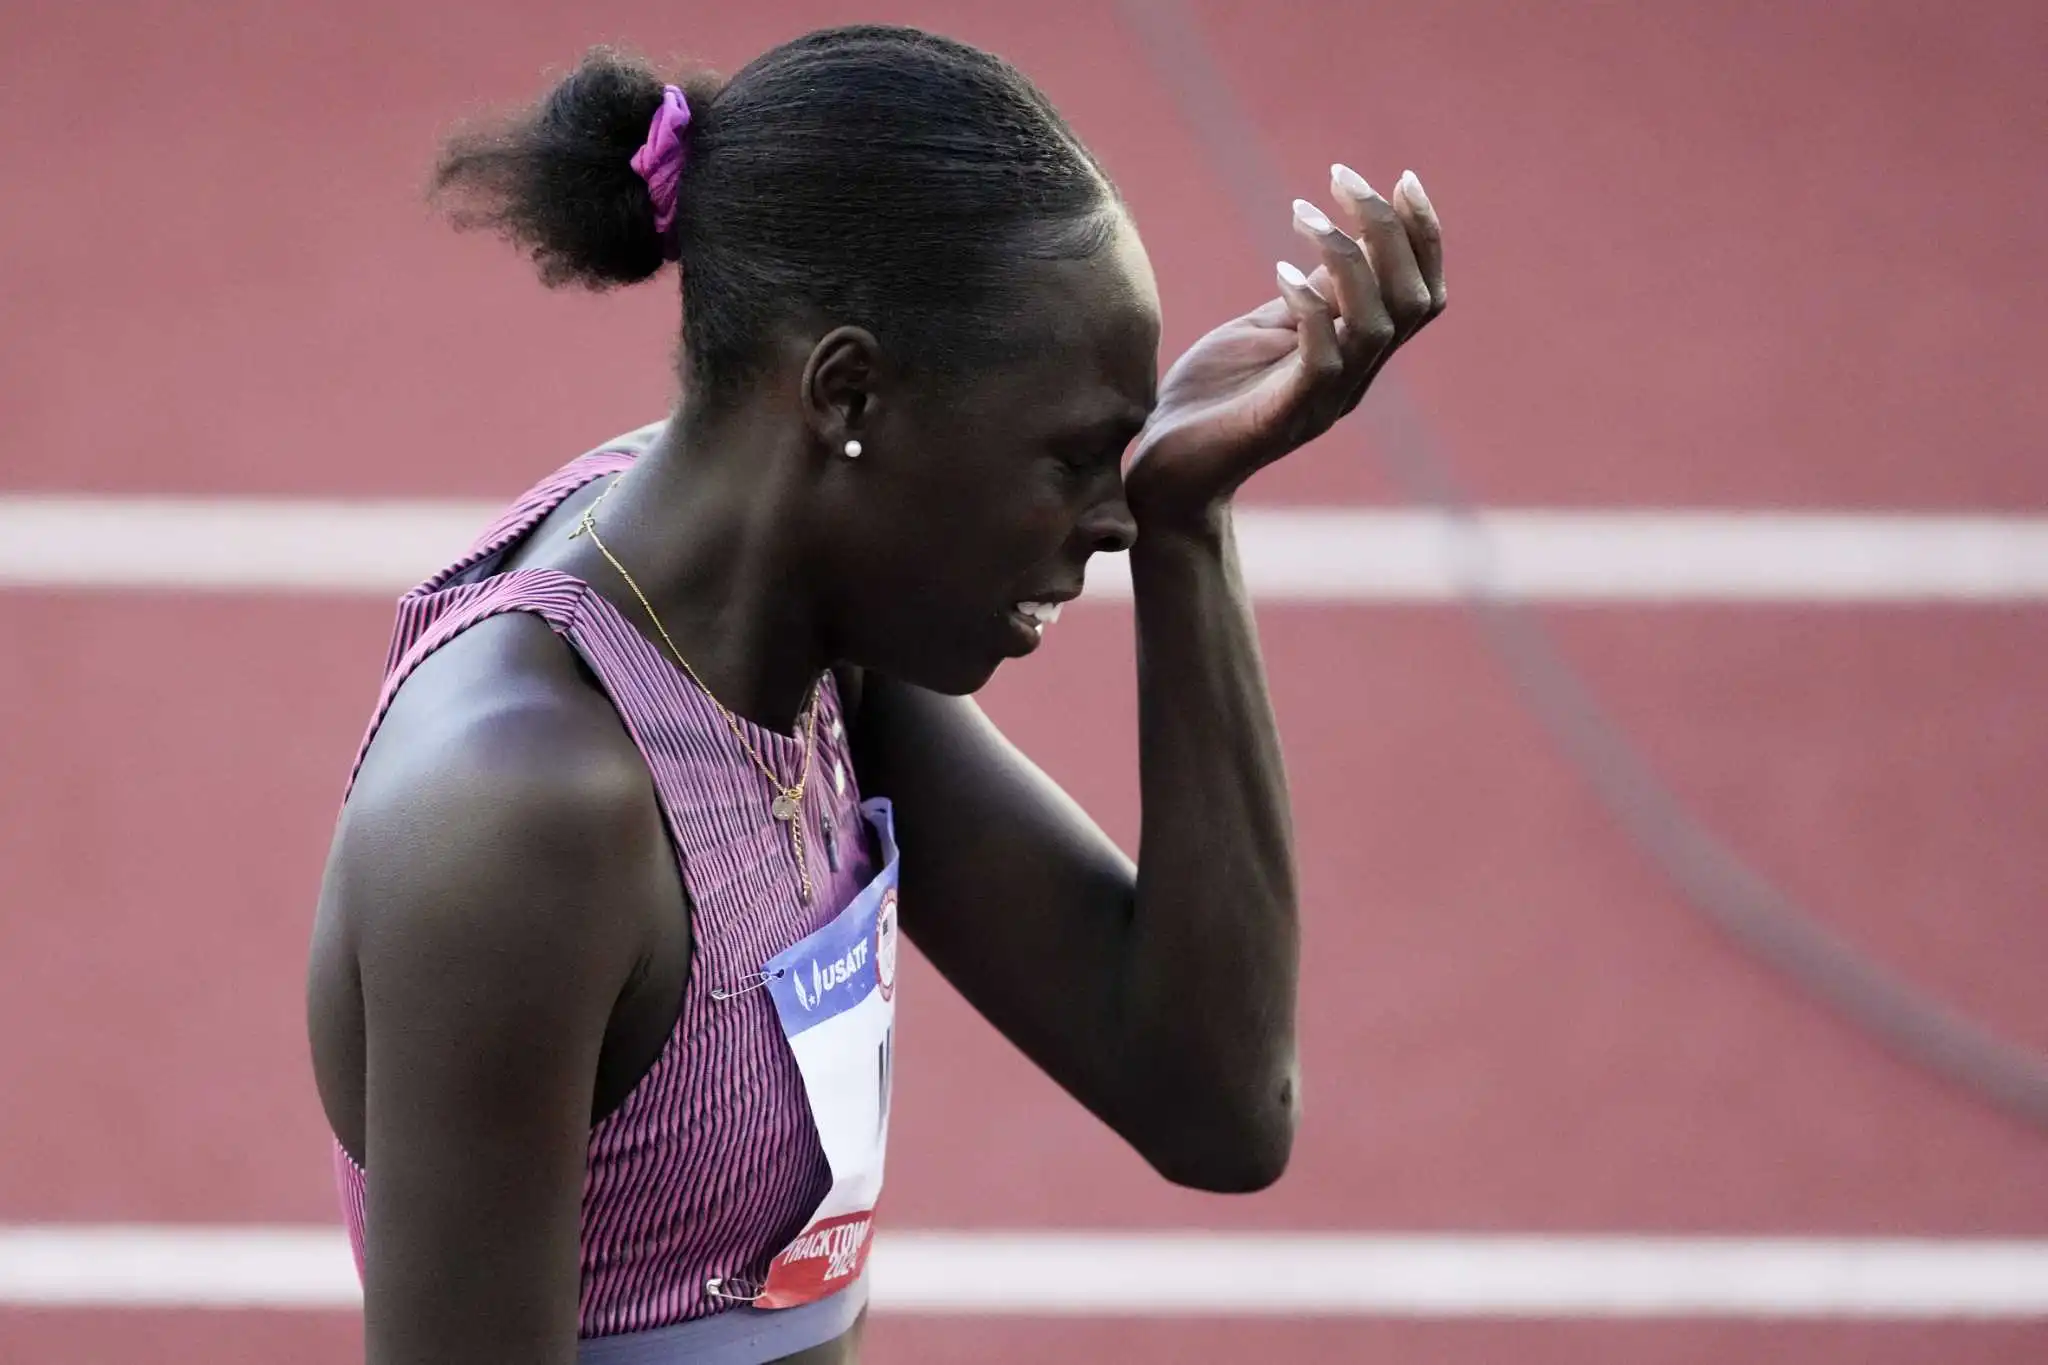 Athing Mu falls in 800 meters, loses chance to defend Olympic title